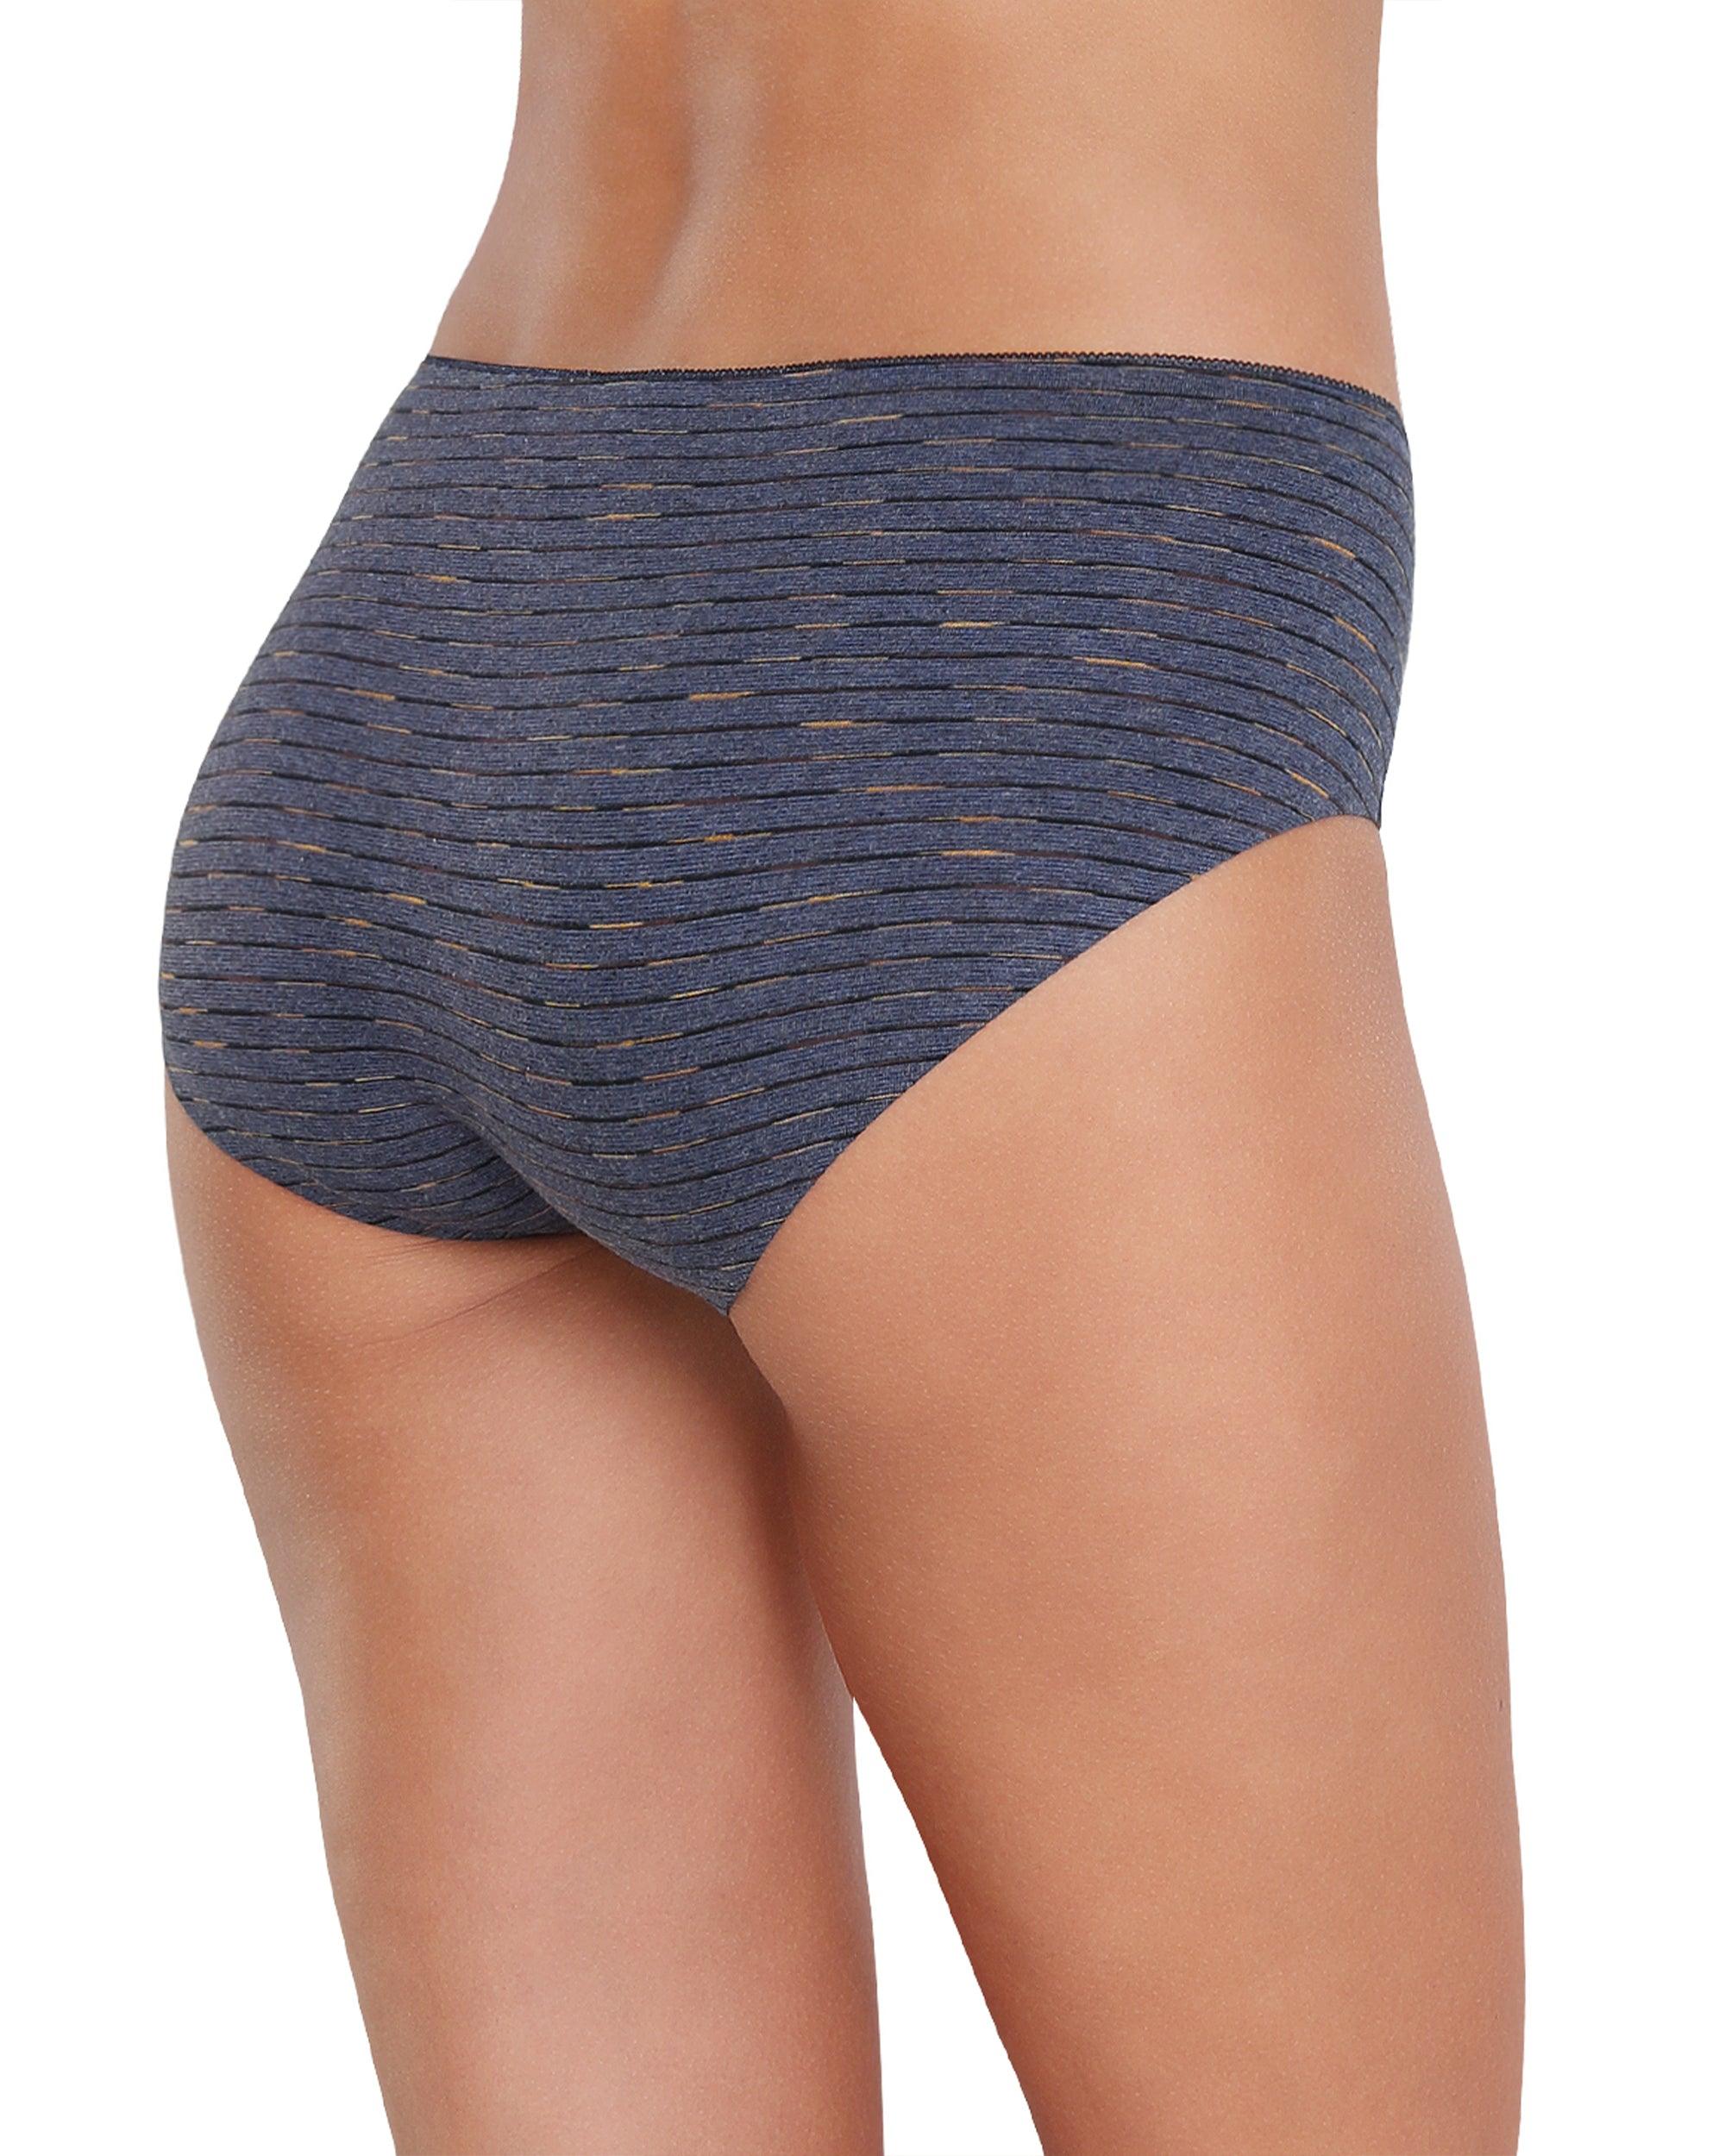 Altheanray Seamless Cotton Briefs Panties for Women 6 Pack